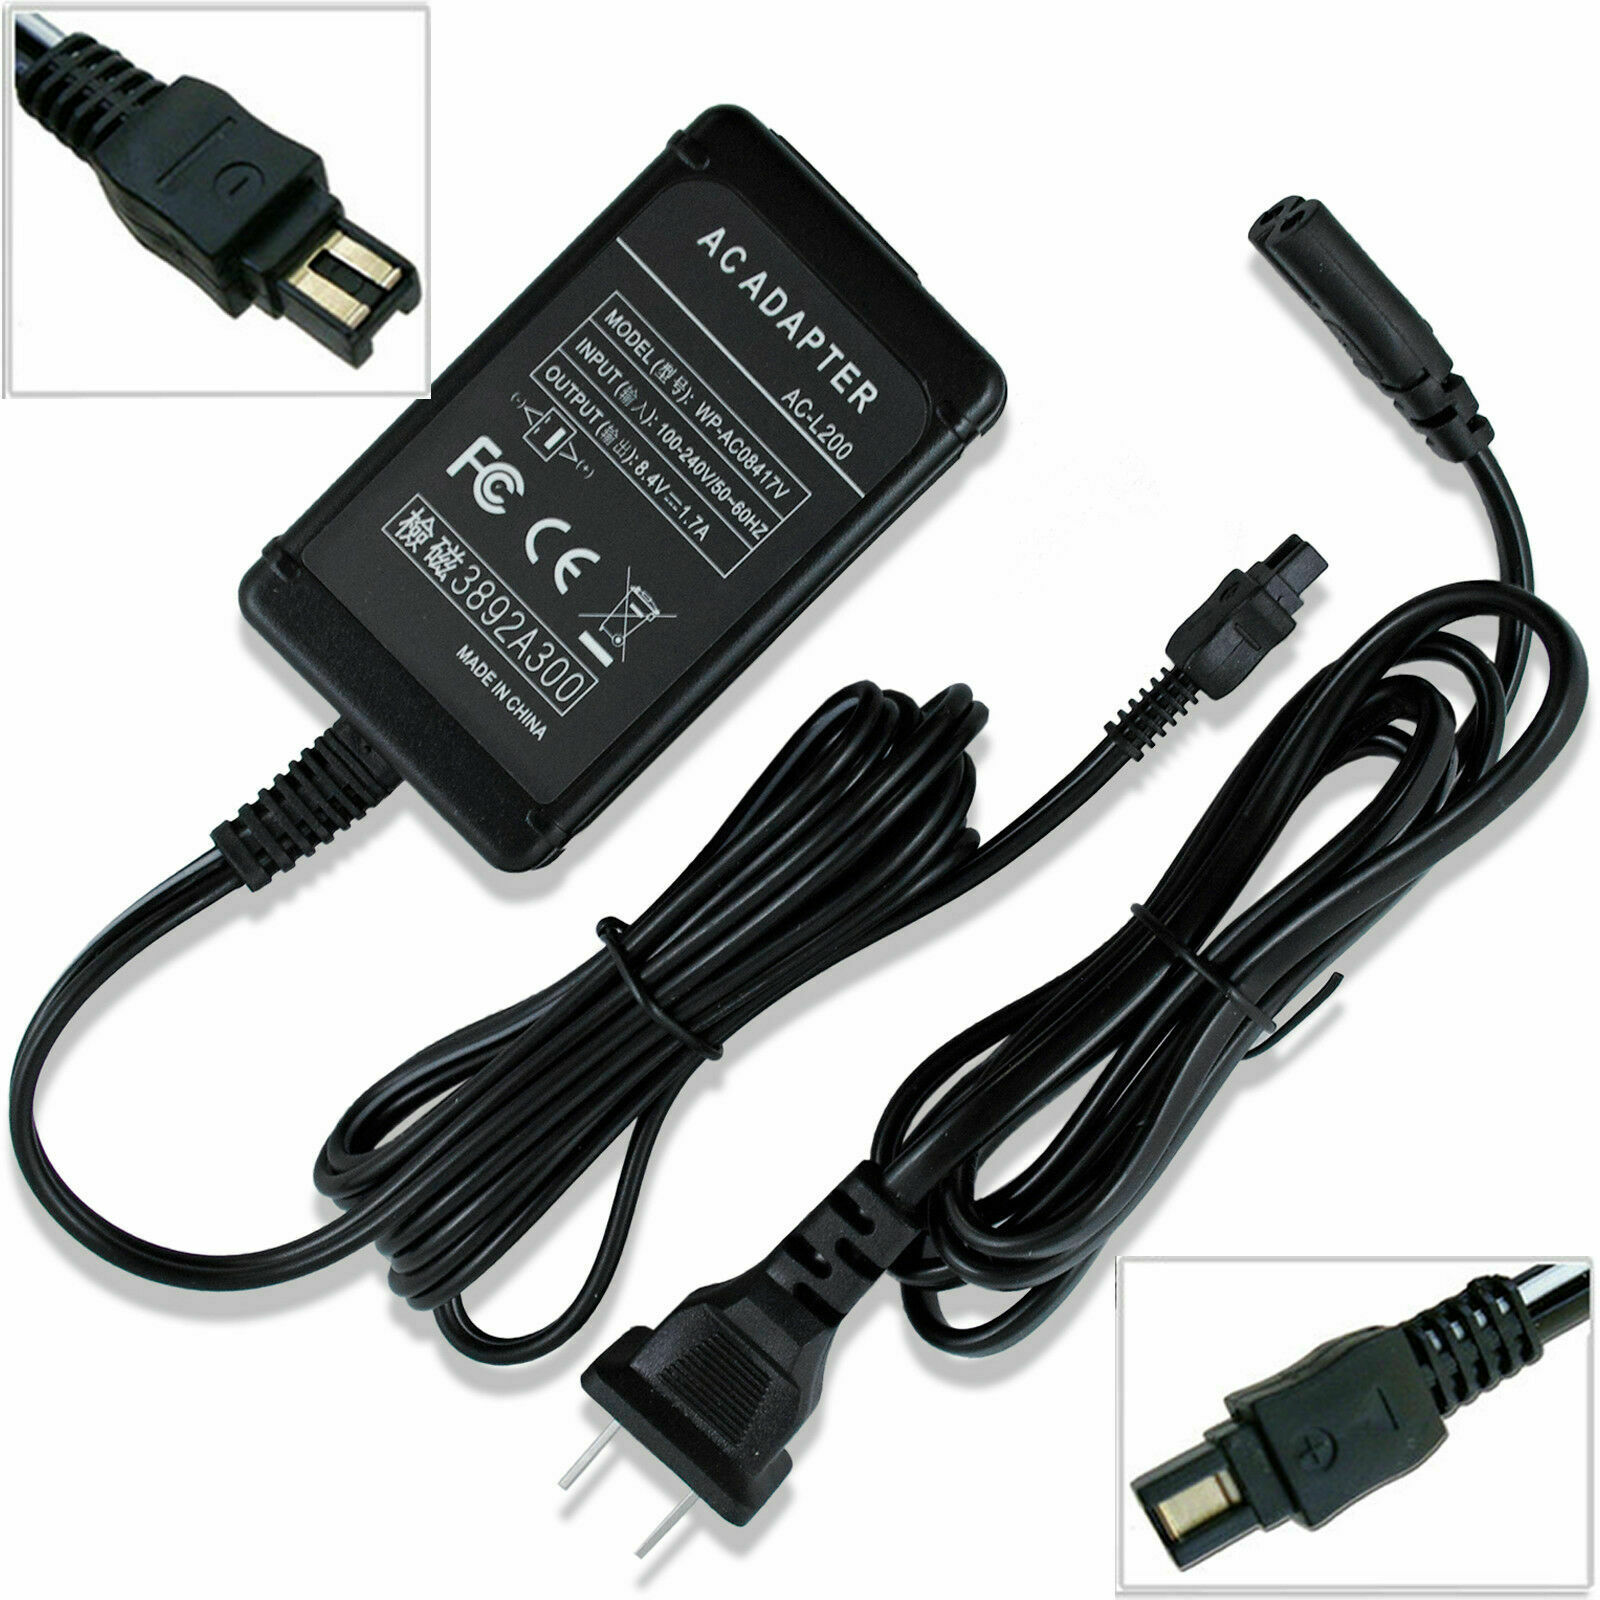 AC Adapter Charger For Sony HandyCam DCR-DVD650 DCR-DVD650E DCR-DVD710 DCR-SX85 To Fit: Camera MPN: Does not apply